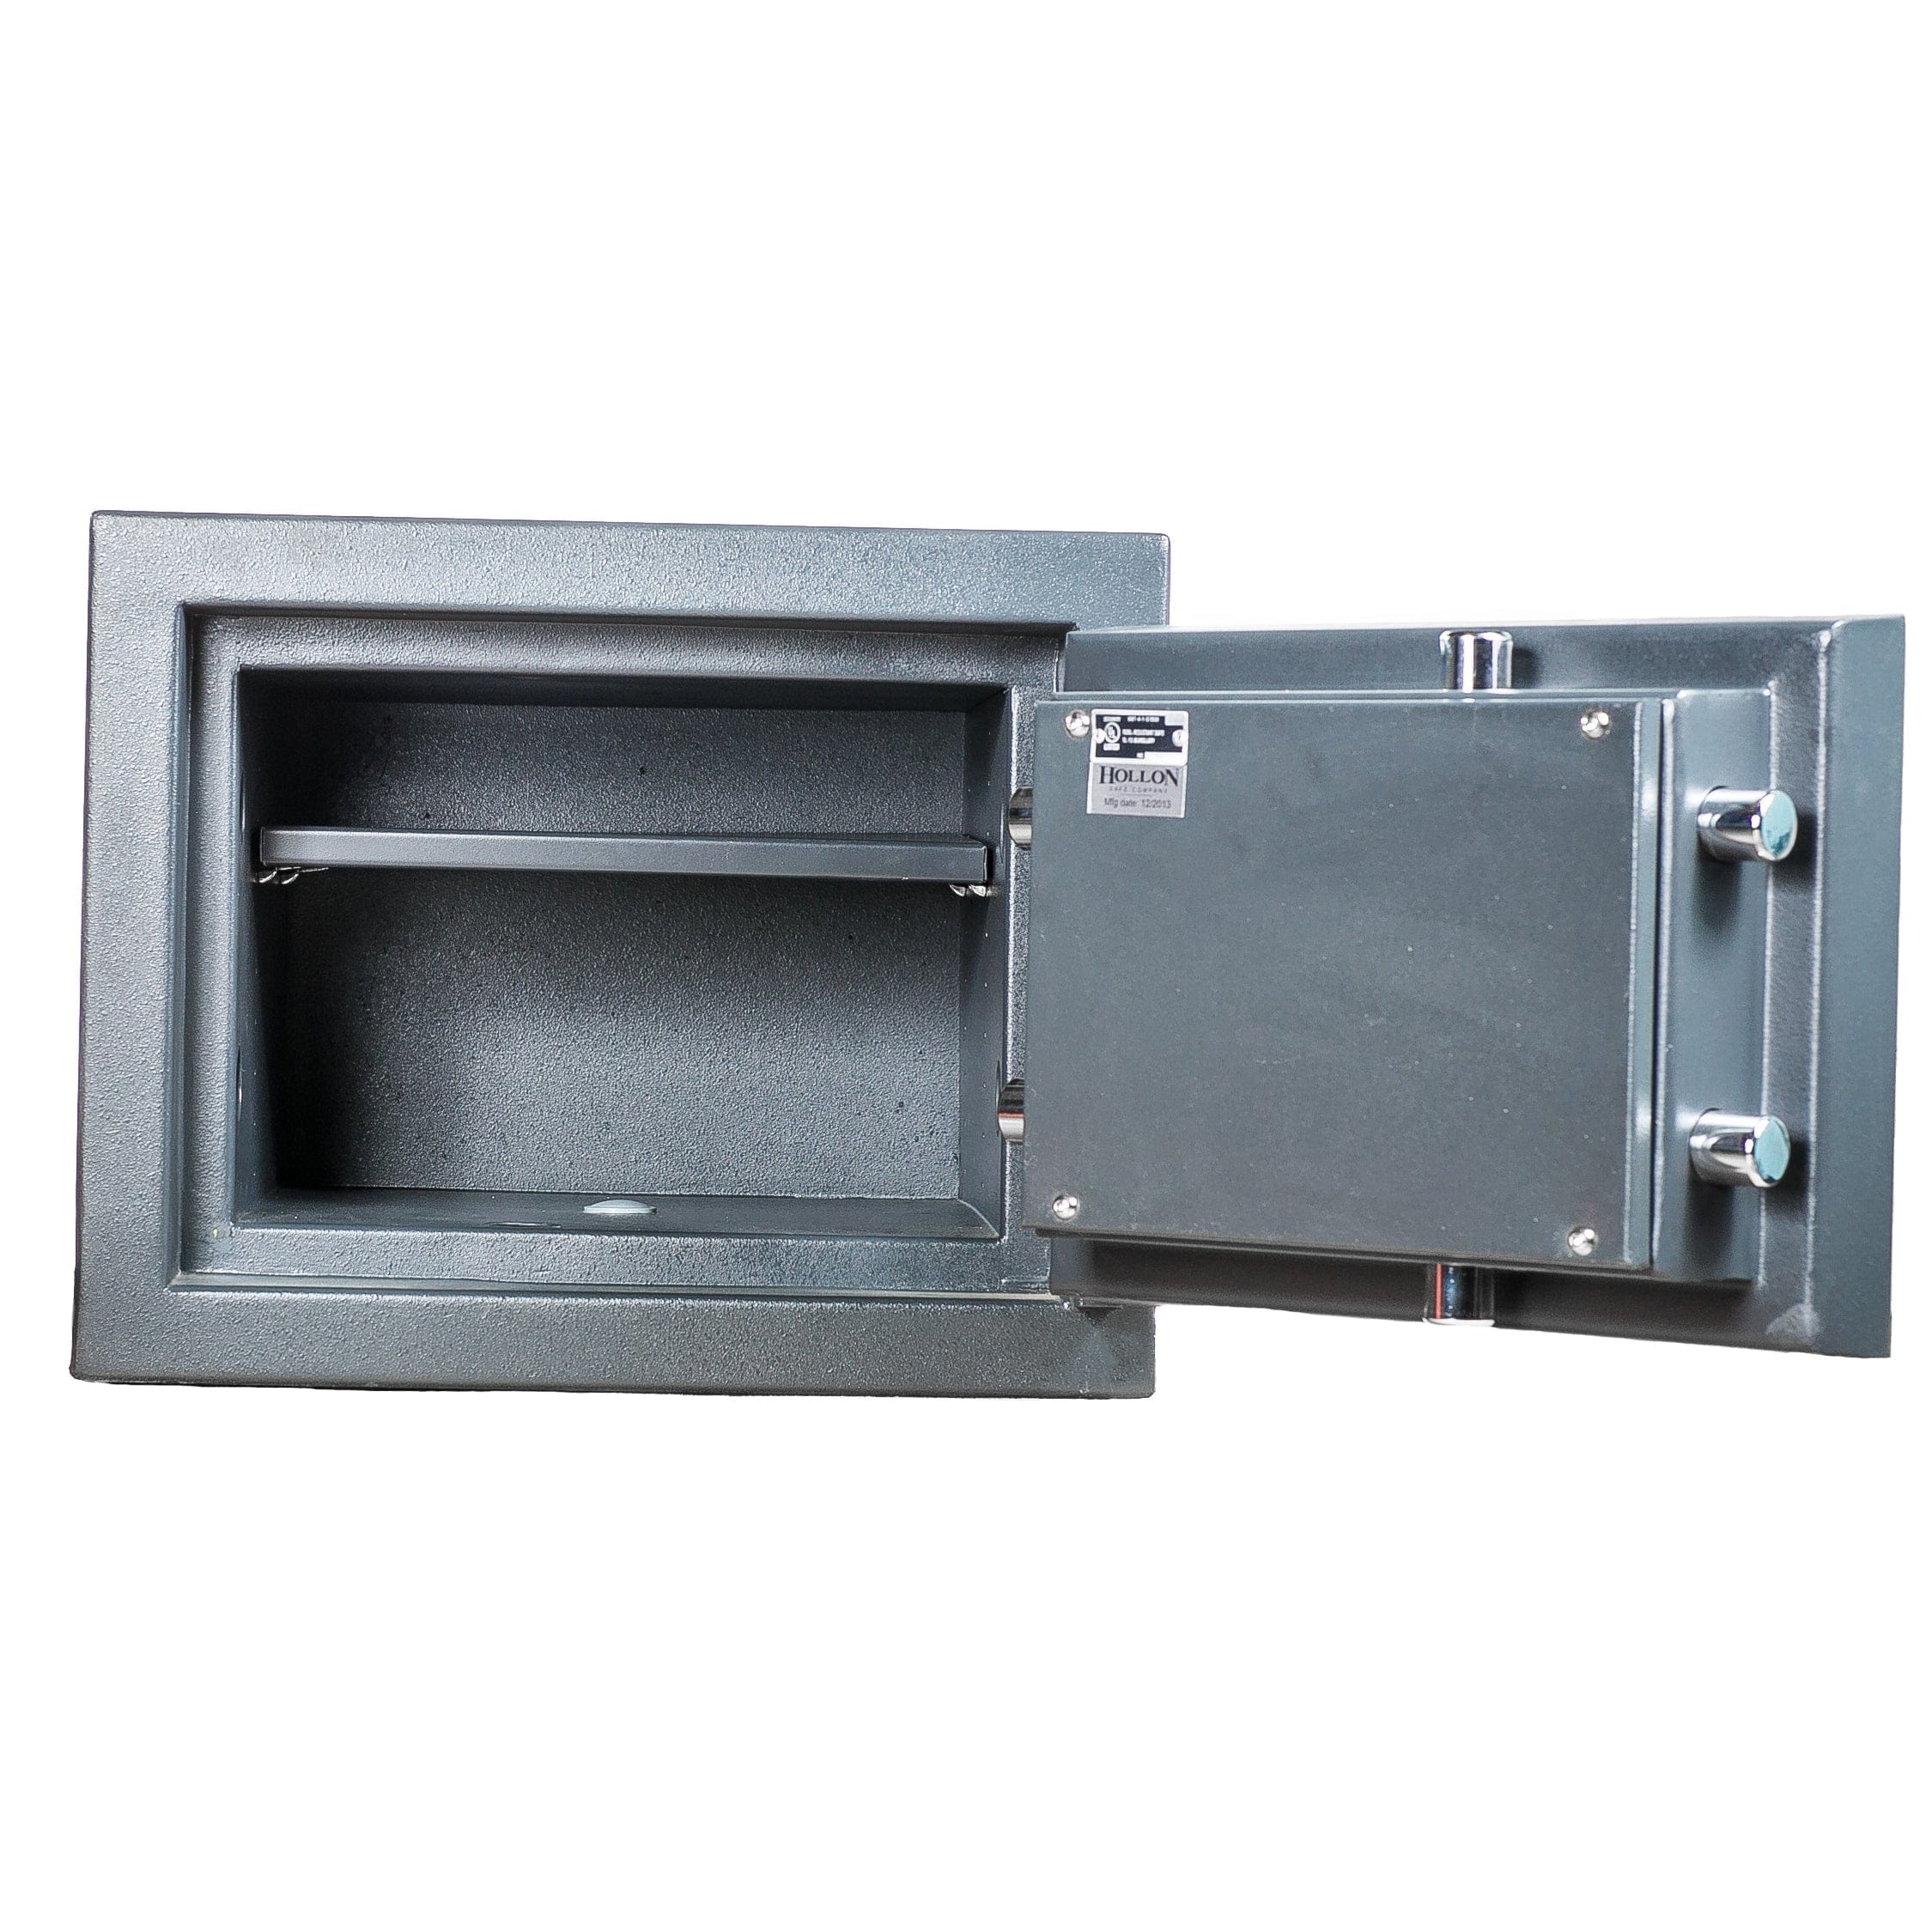 Hollon Hollon TL-15 Rated Safe PM Series PM-1014 T.L. Rated Safes